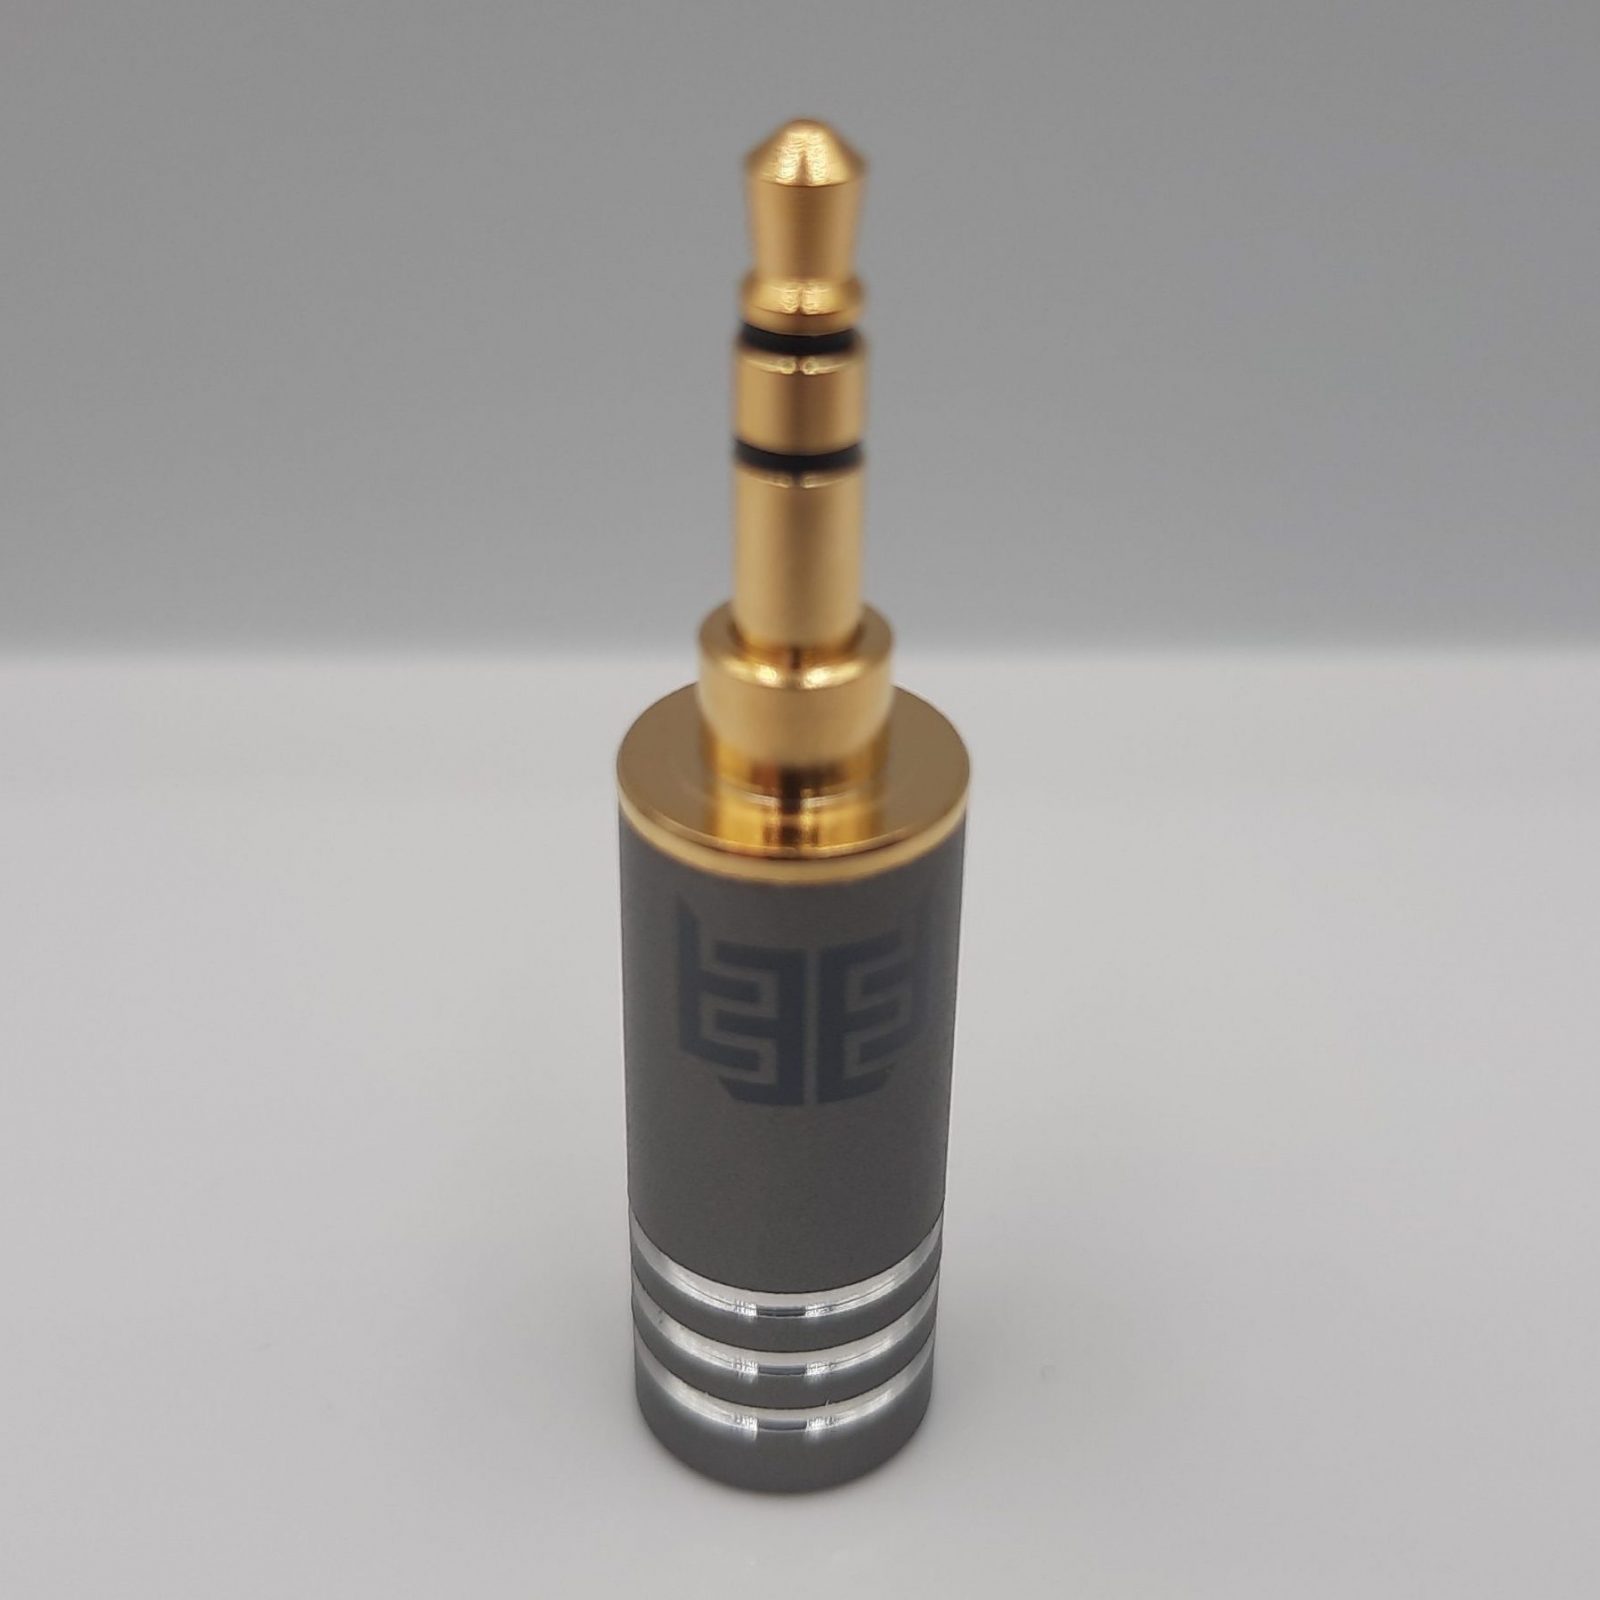 PLUSSOUND Gold Plated 3.5mm TRRS